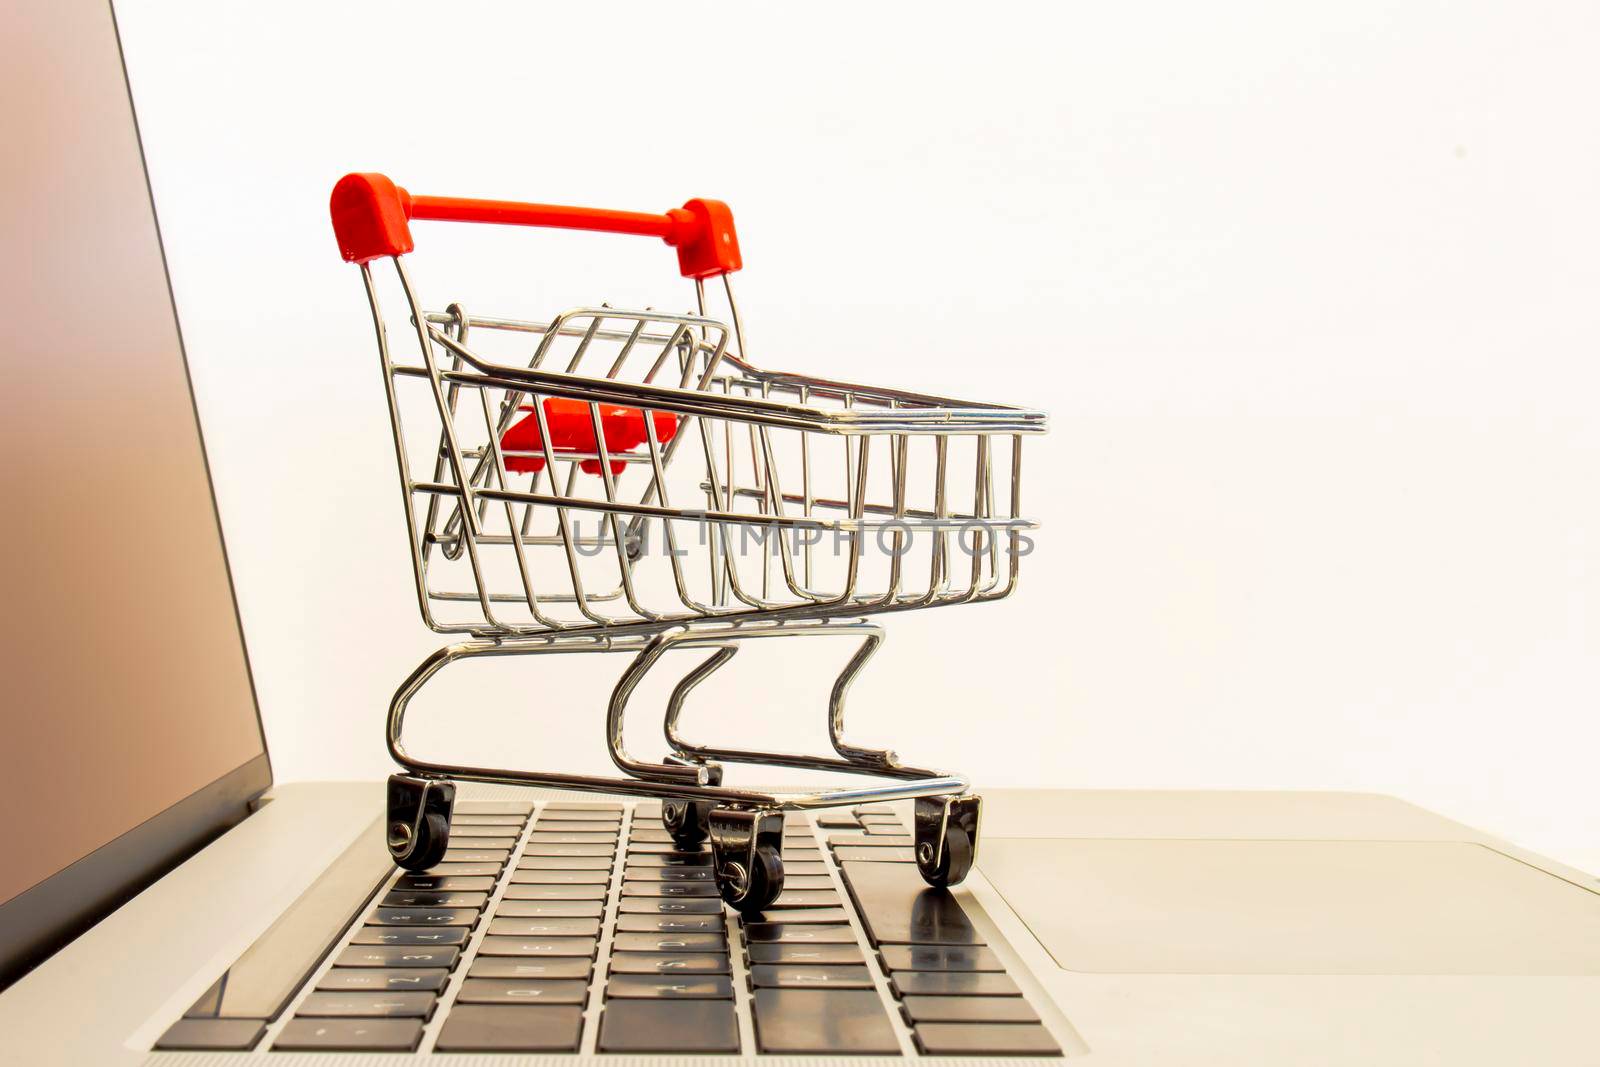 A Supermarket Hand Trolley, Mini Shopping Cart on top of a computer keyboard. Concept: Online shopping. by oasisamuel